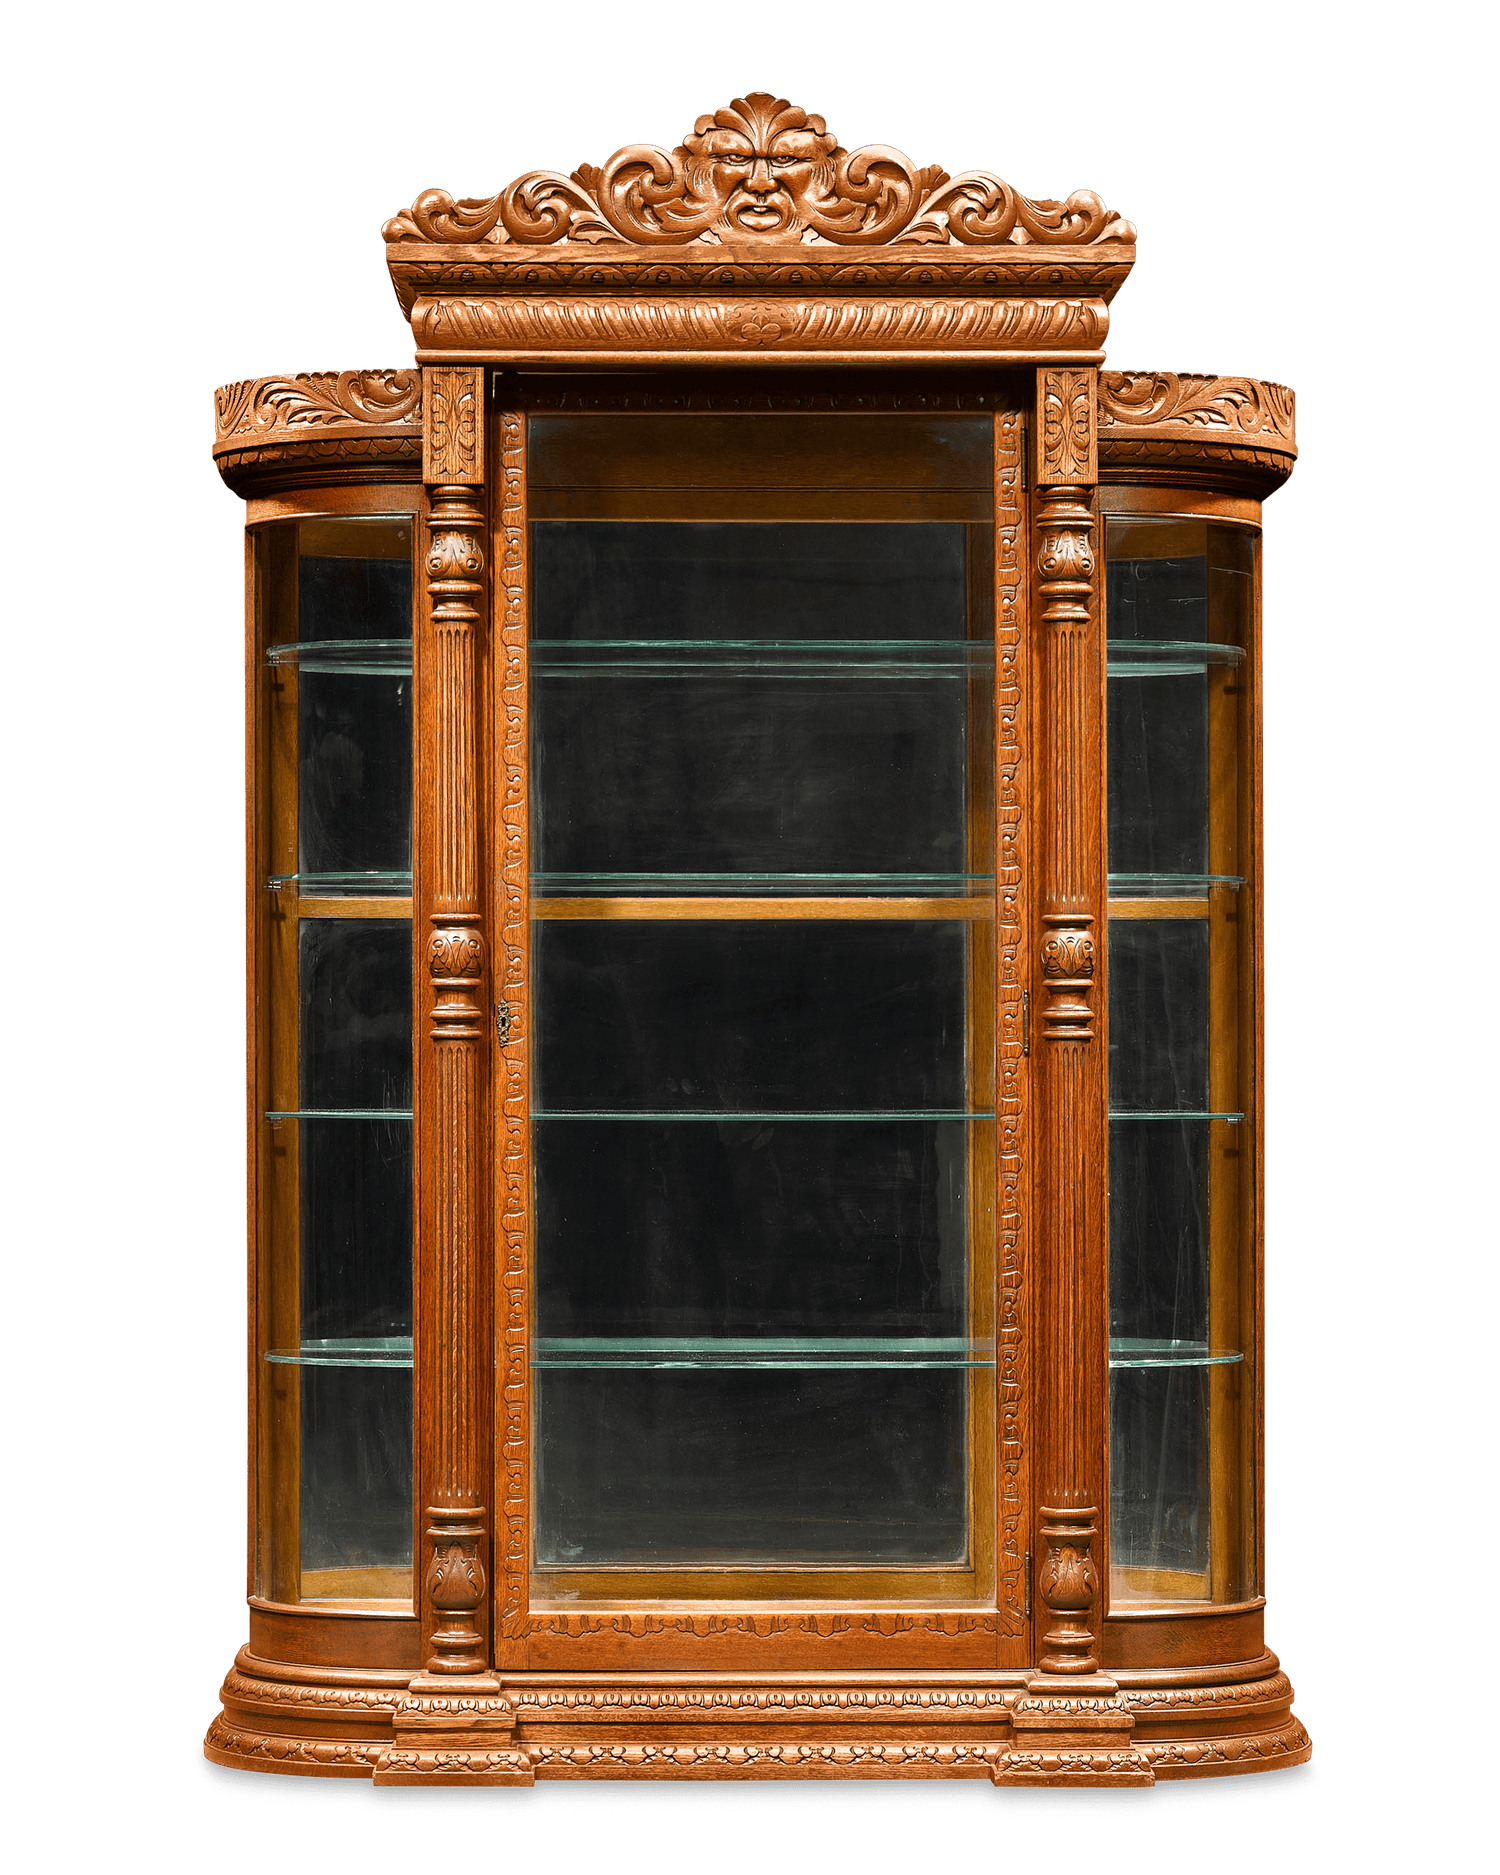 The china cabinet is exceptional in both size and decoration